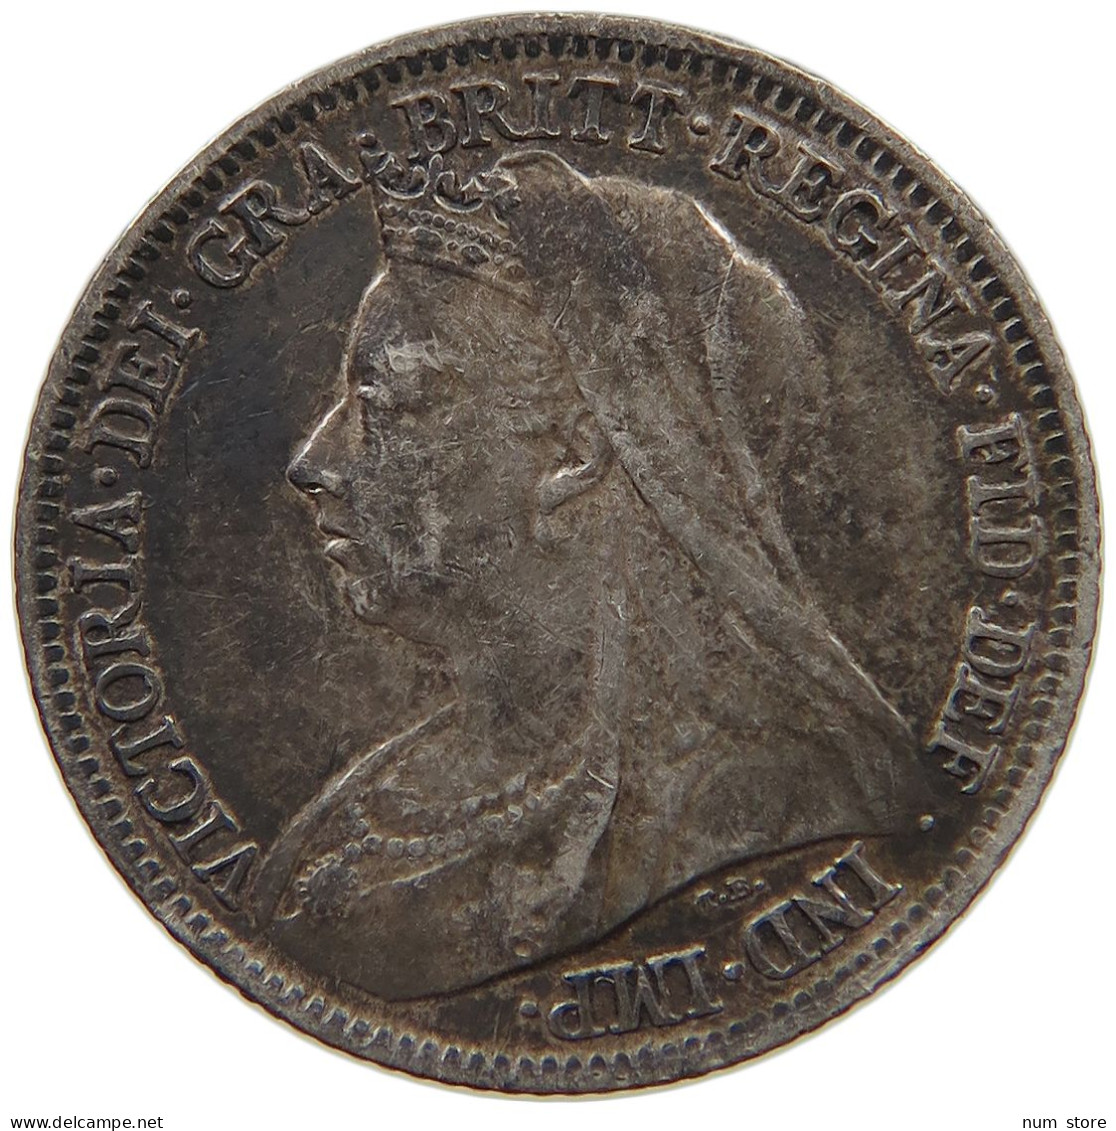 GREAT BRITAIN SIXPENCE 1901 Victoria 1837-1901 #t139 0231 - H. 6 Pence